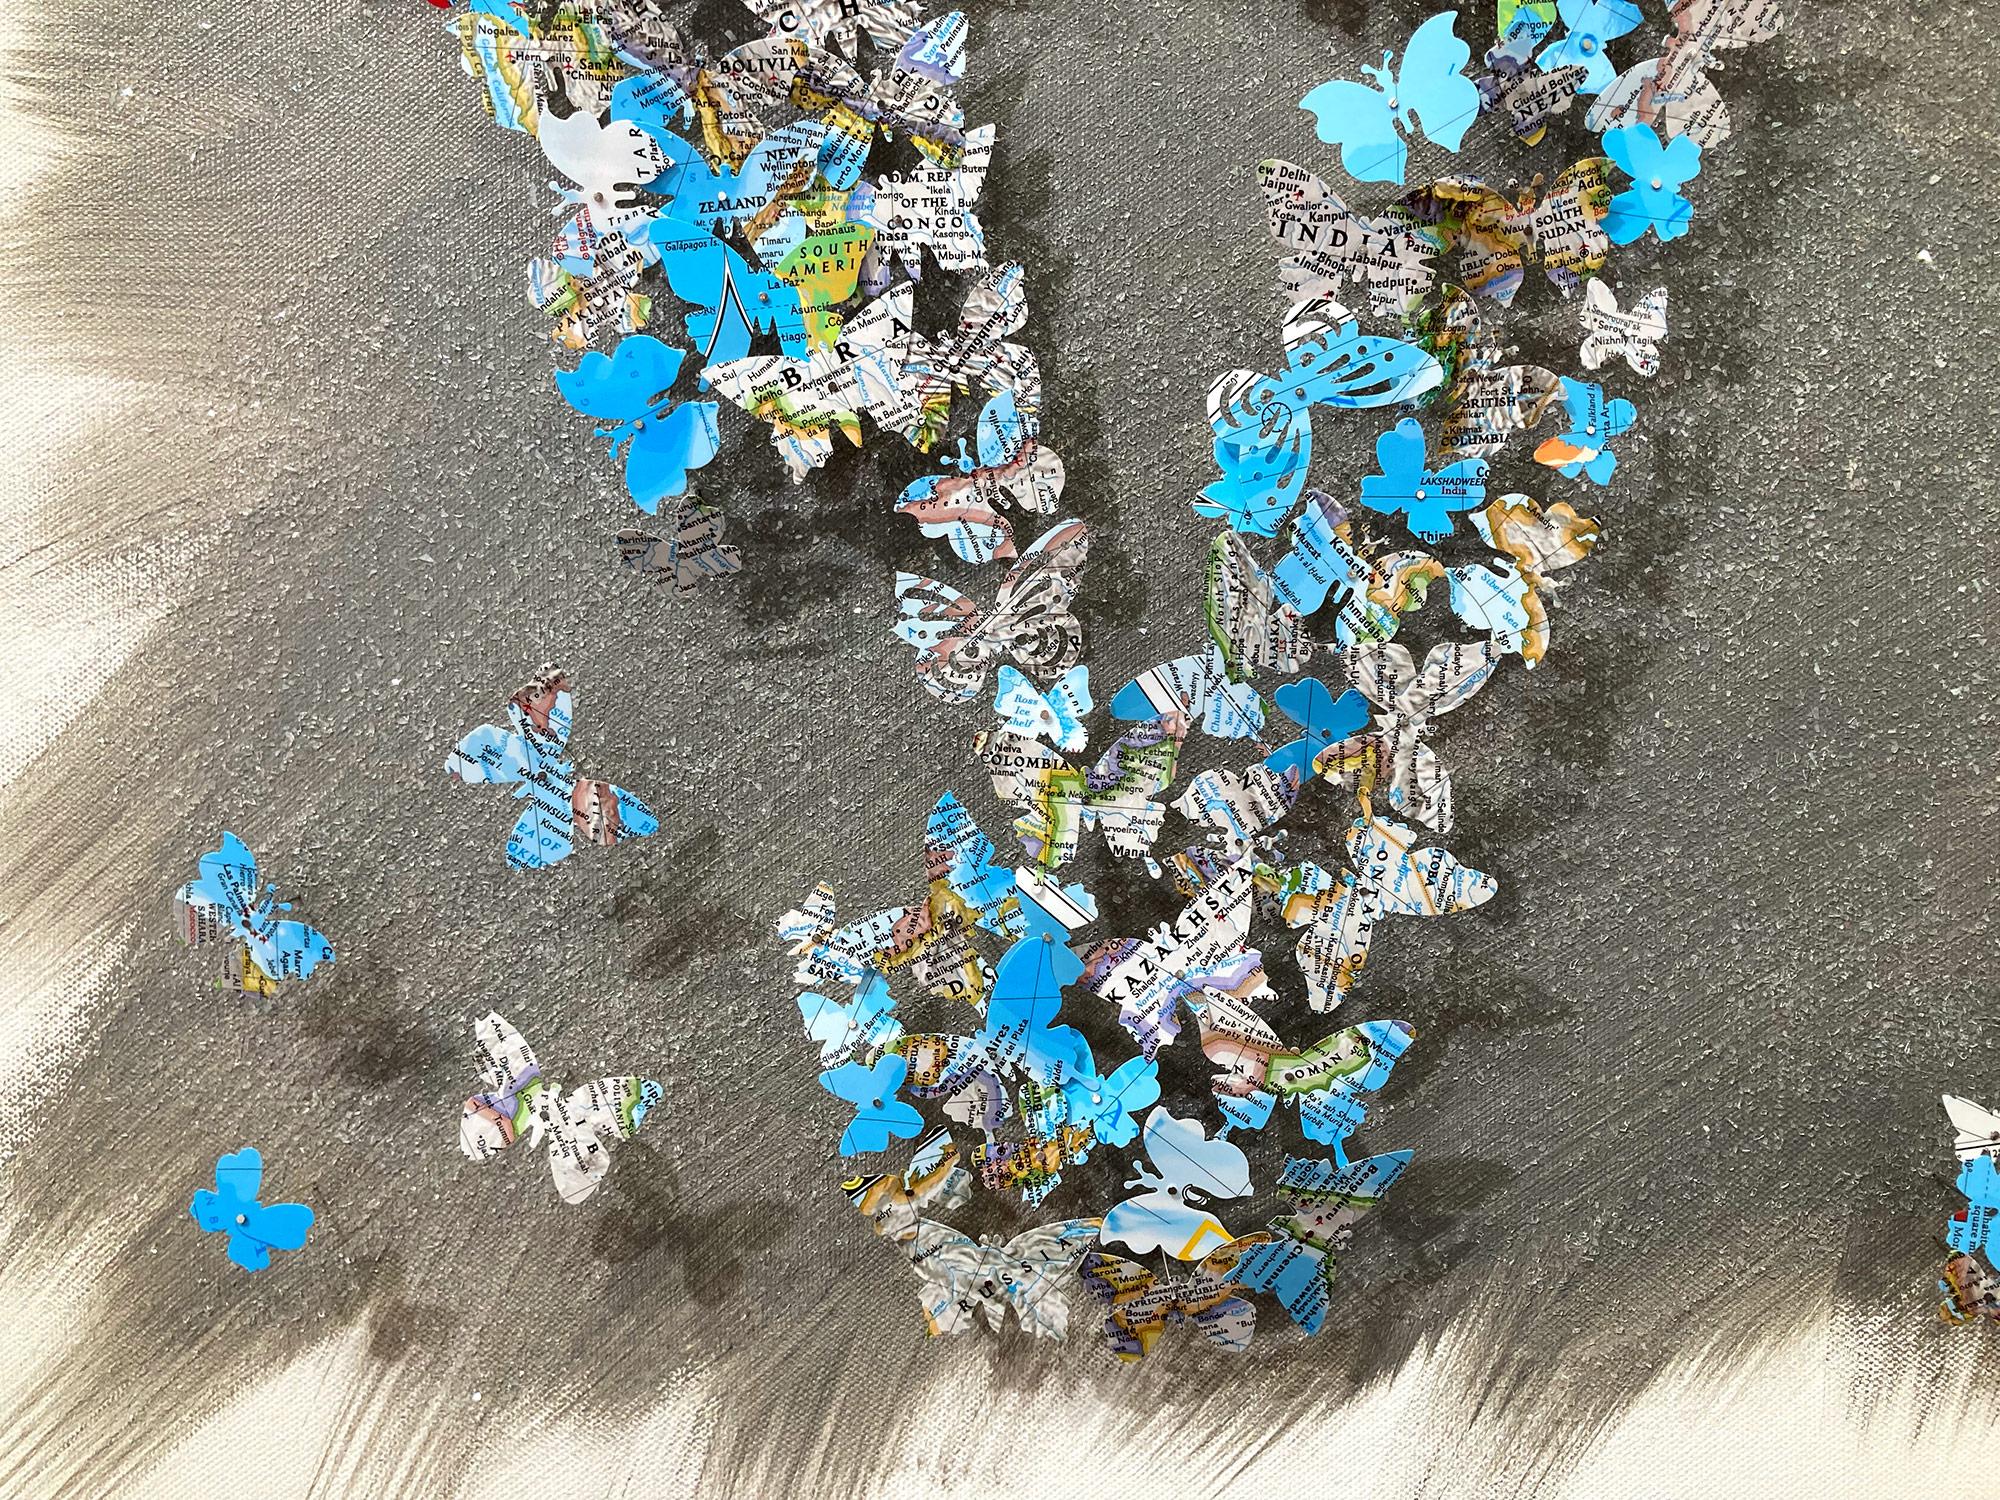 This piece is executed with hundreds of hand cut butterflies, and comes displayed in an acrylic shadow box. These works conjure sensations of nostalgia, created from maps, cutting out words, symbols, and places to create feelings of unity within the